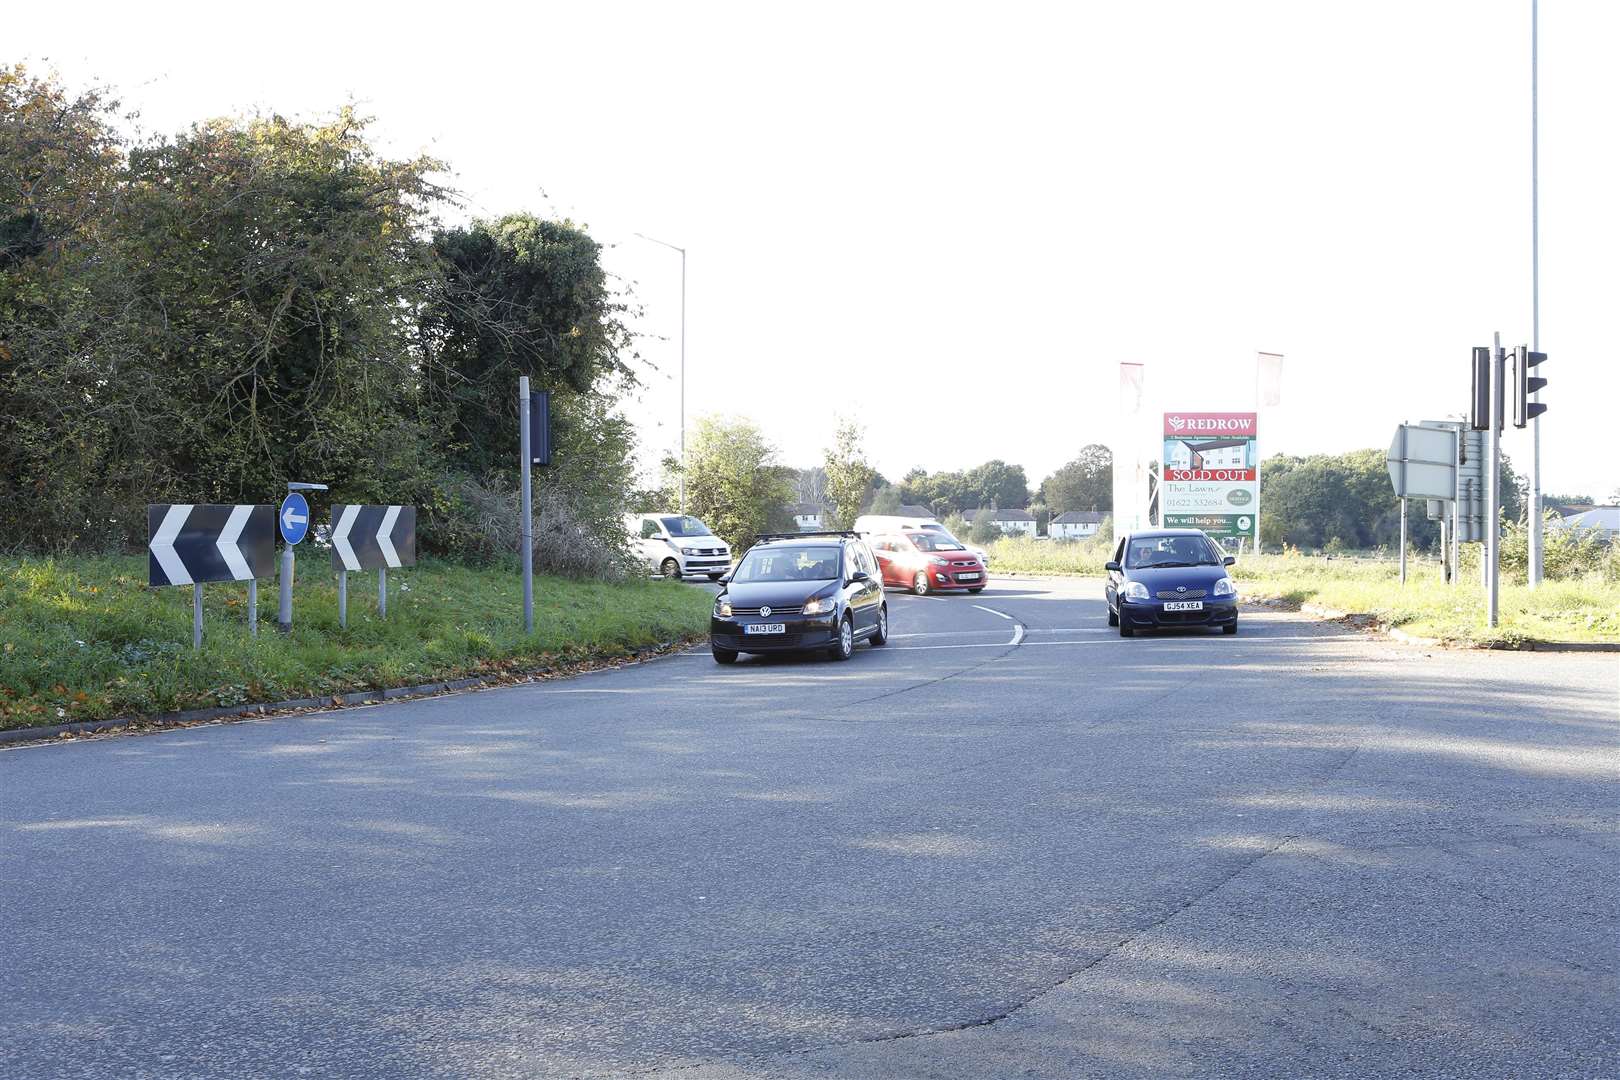 The A20 Coldharbour roundabout is to be made much larger and the traffic lights dropped